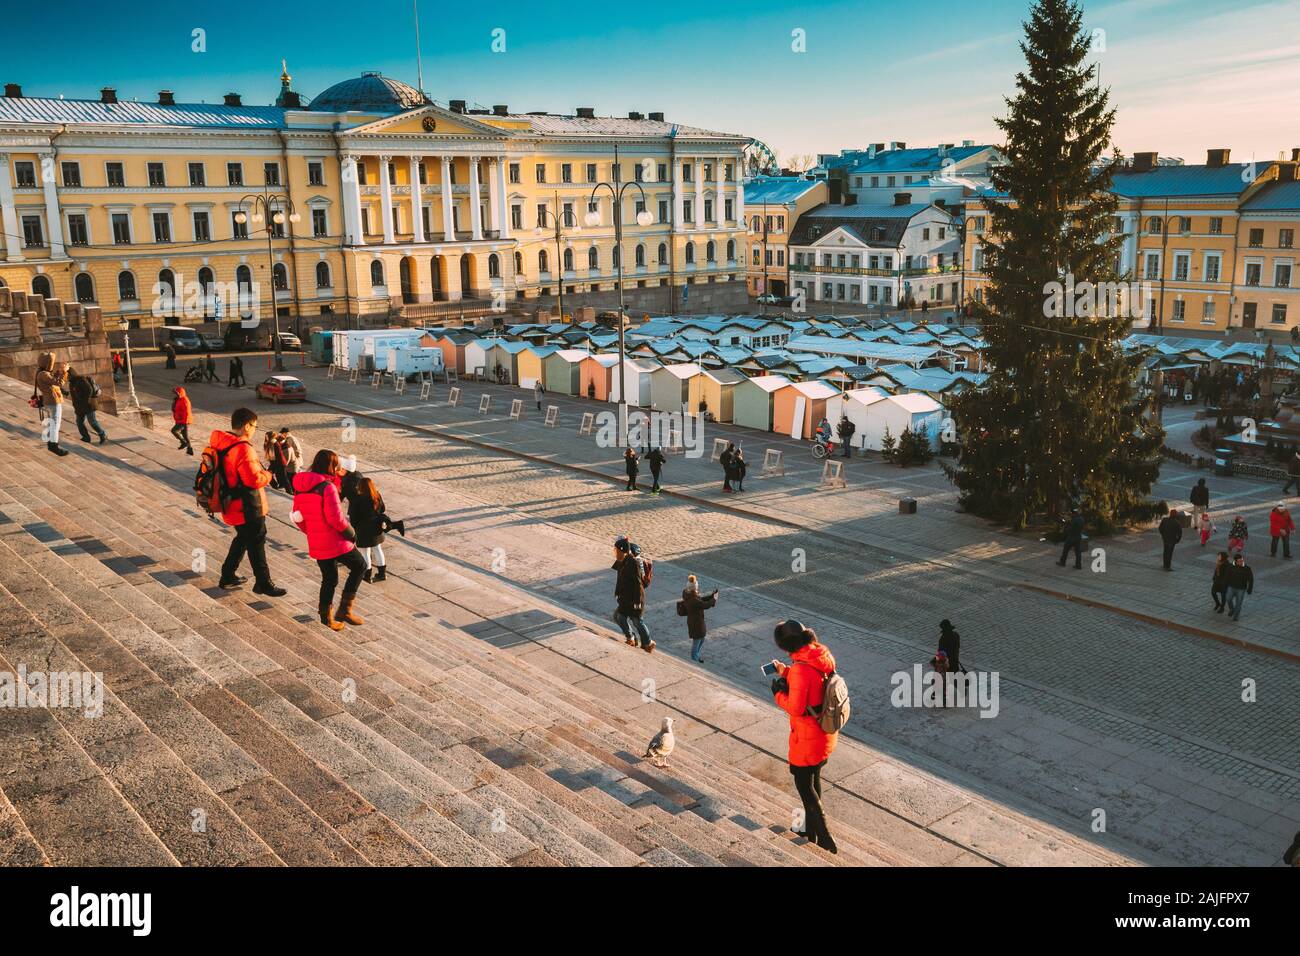 Helsinki, Finland - December 11, 2016: Woman Tourist Taking Picture Of Seagull Bird Near Christmas Xmas Market With Christmas Tree On Senate Square In Stock Photo